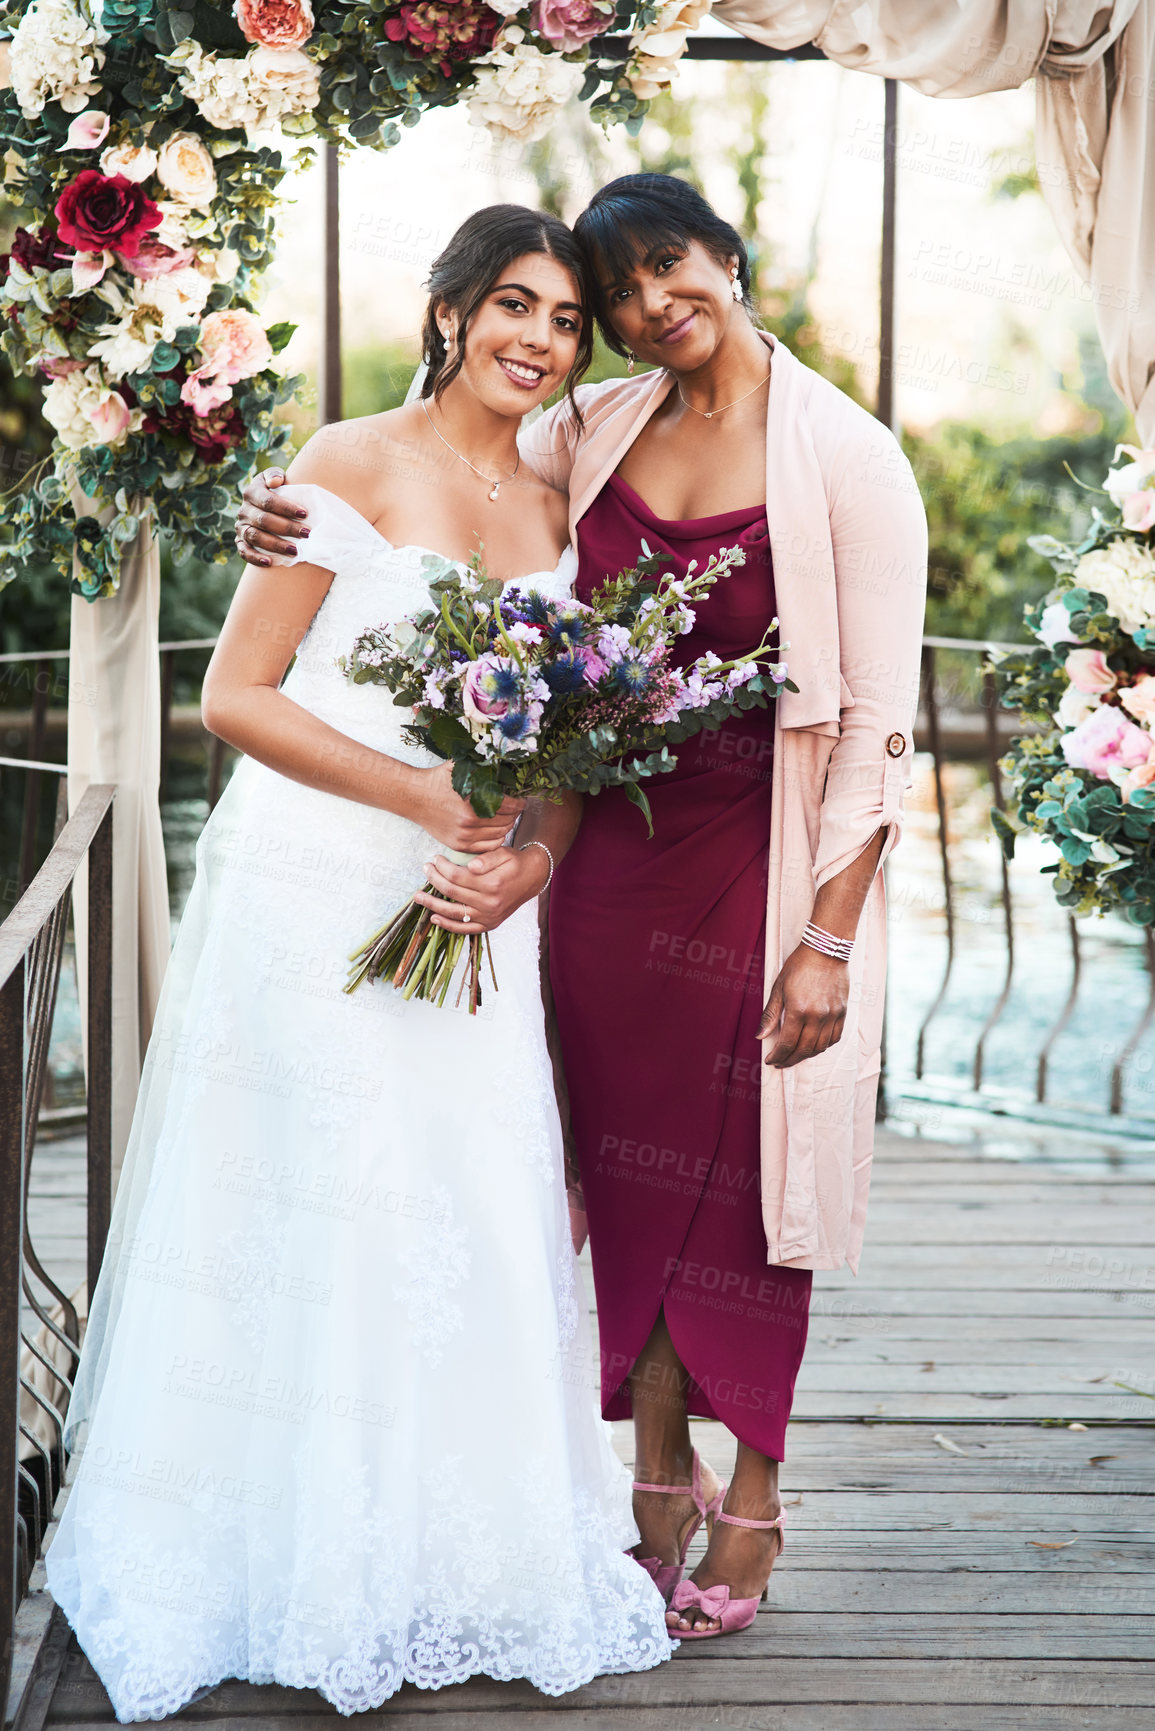 Buy stock photo Full length shot of a happy young bride posing with her mother outdoors on her wedding day